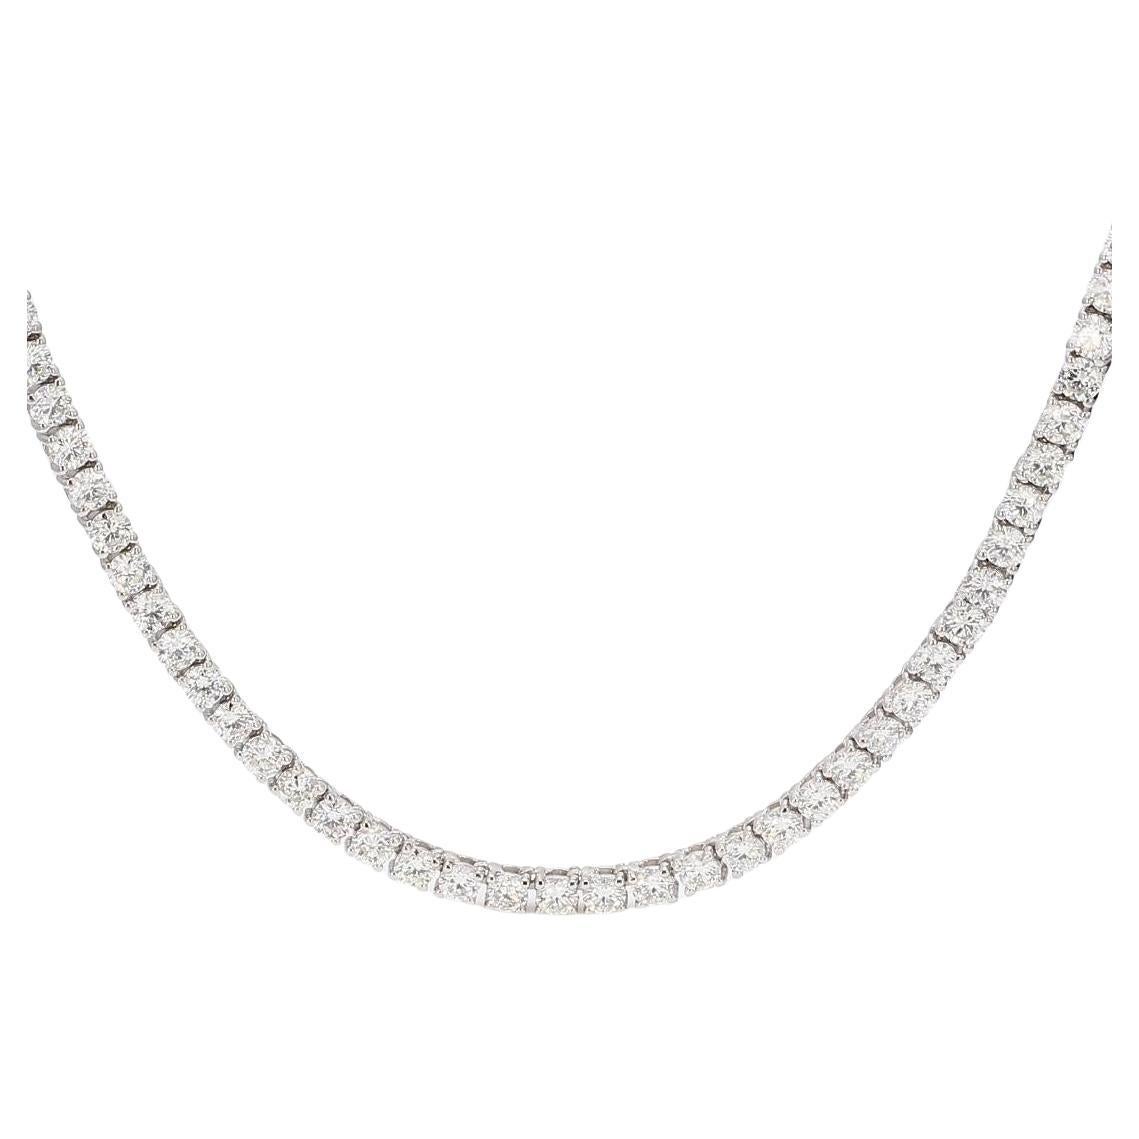 Tennis Necklace in 14K White Gold with Round Diamonds. D26.11ct.t.w. For Sale